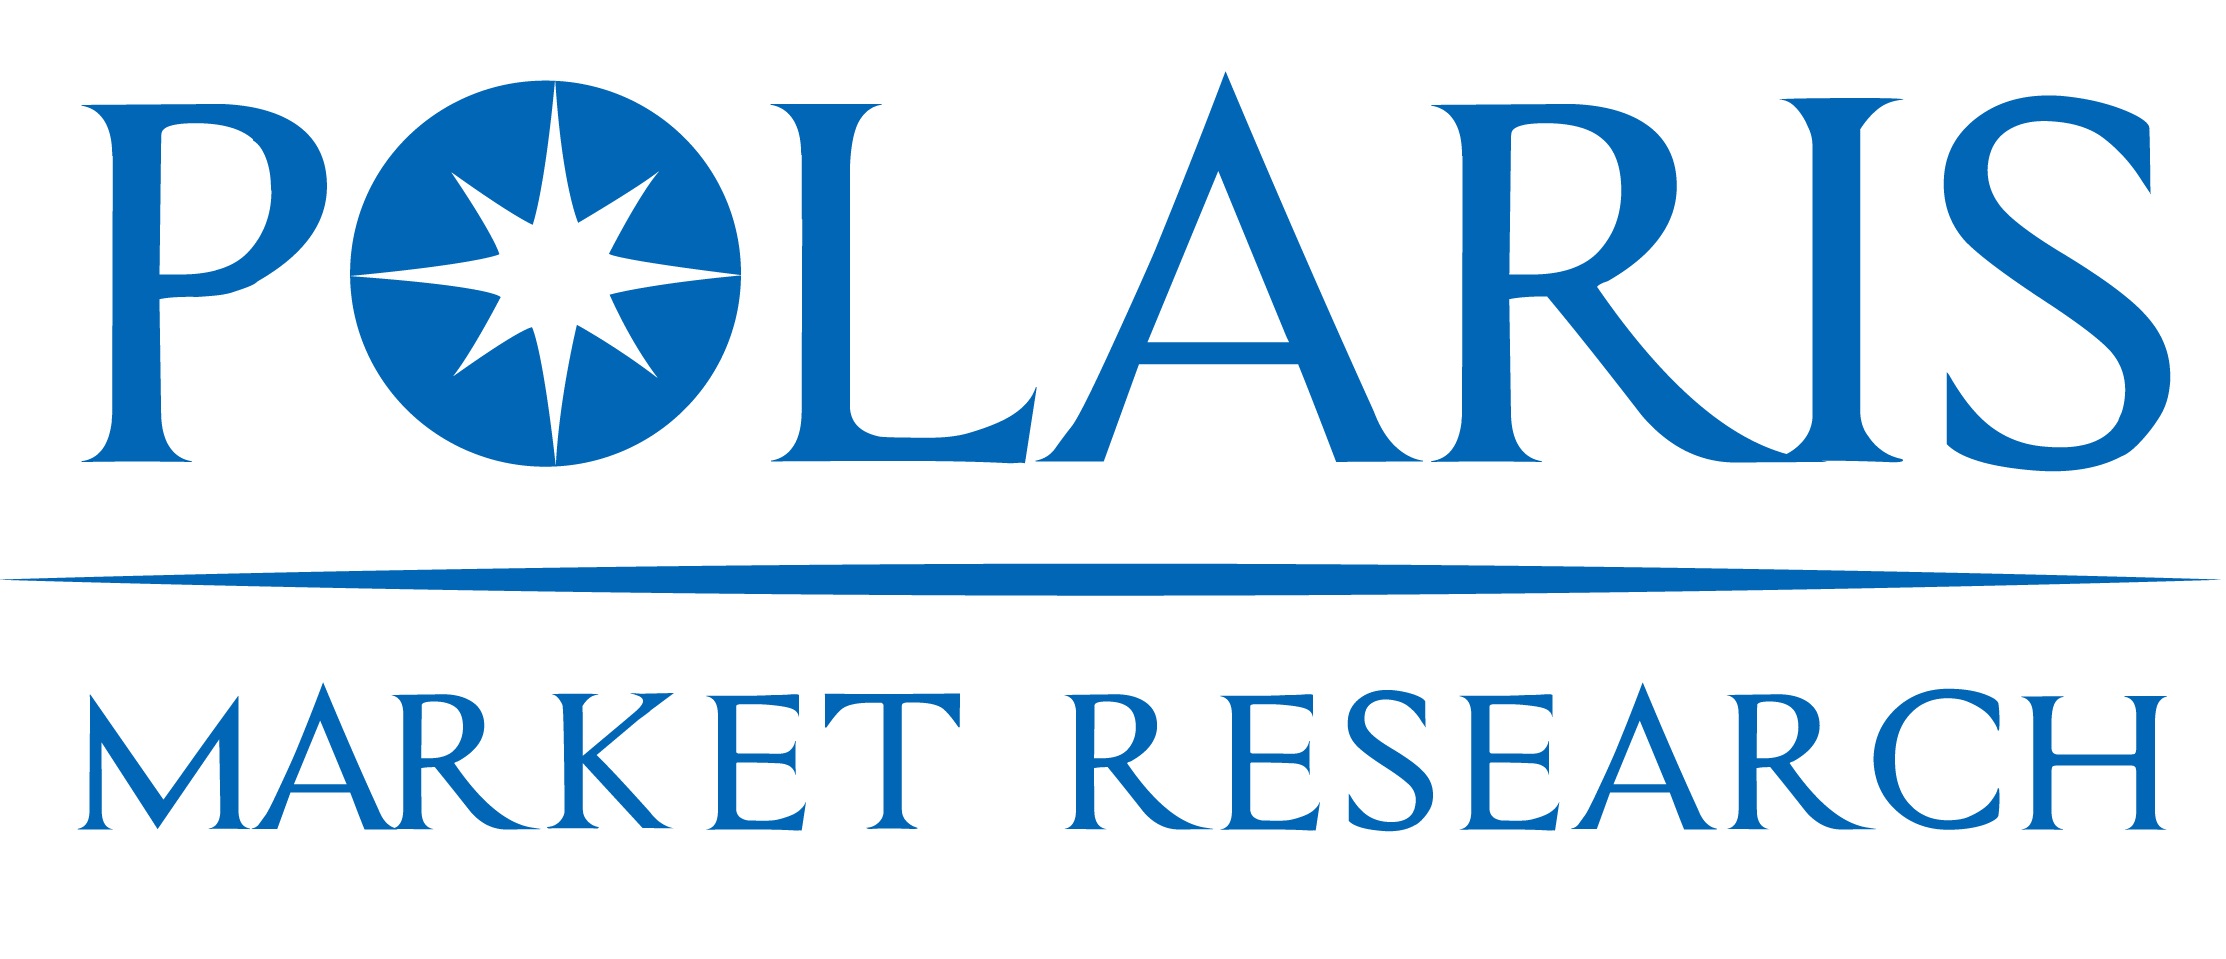 At 7% CAGR, Global EPDM Market Share Value Predicted Over USD 4.06 Billion by 2028 | Polaris Market Research